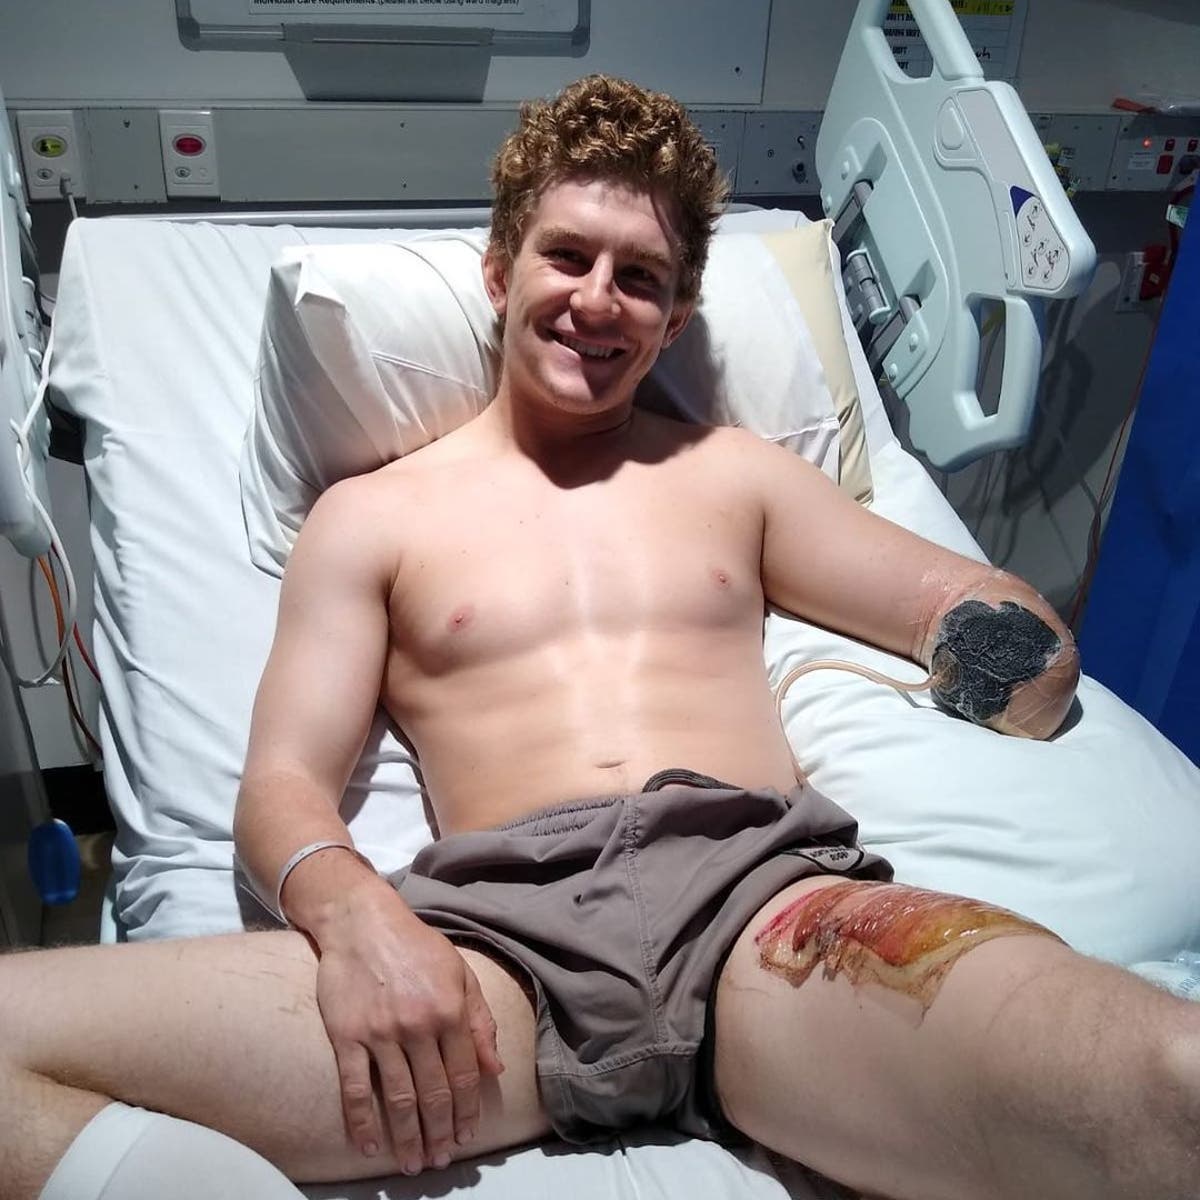 British backpacker loses arm in horrific farm accident while on Australian gap year